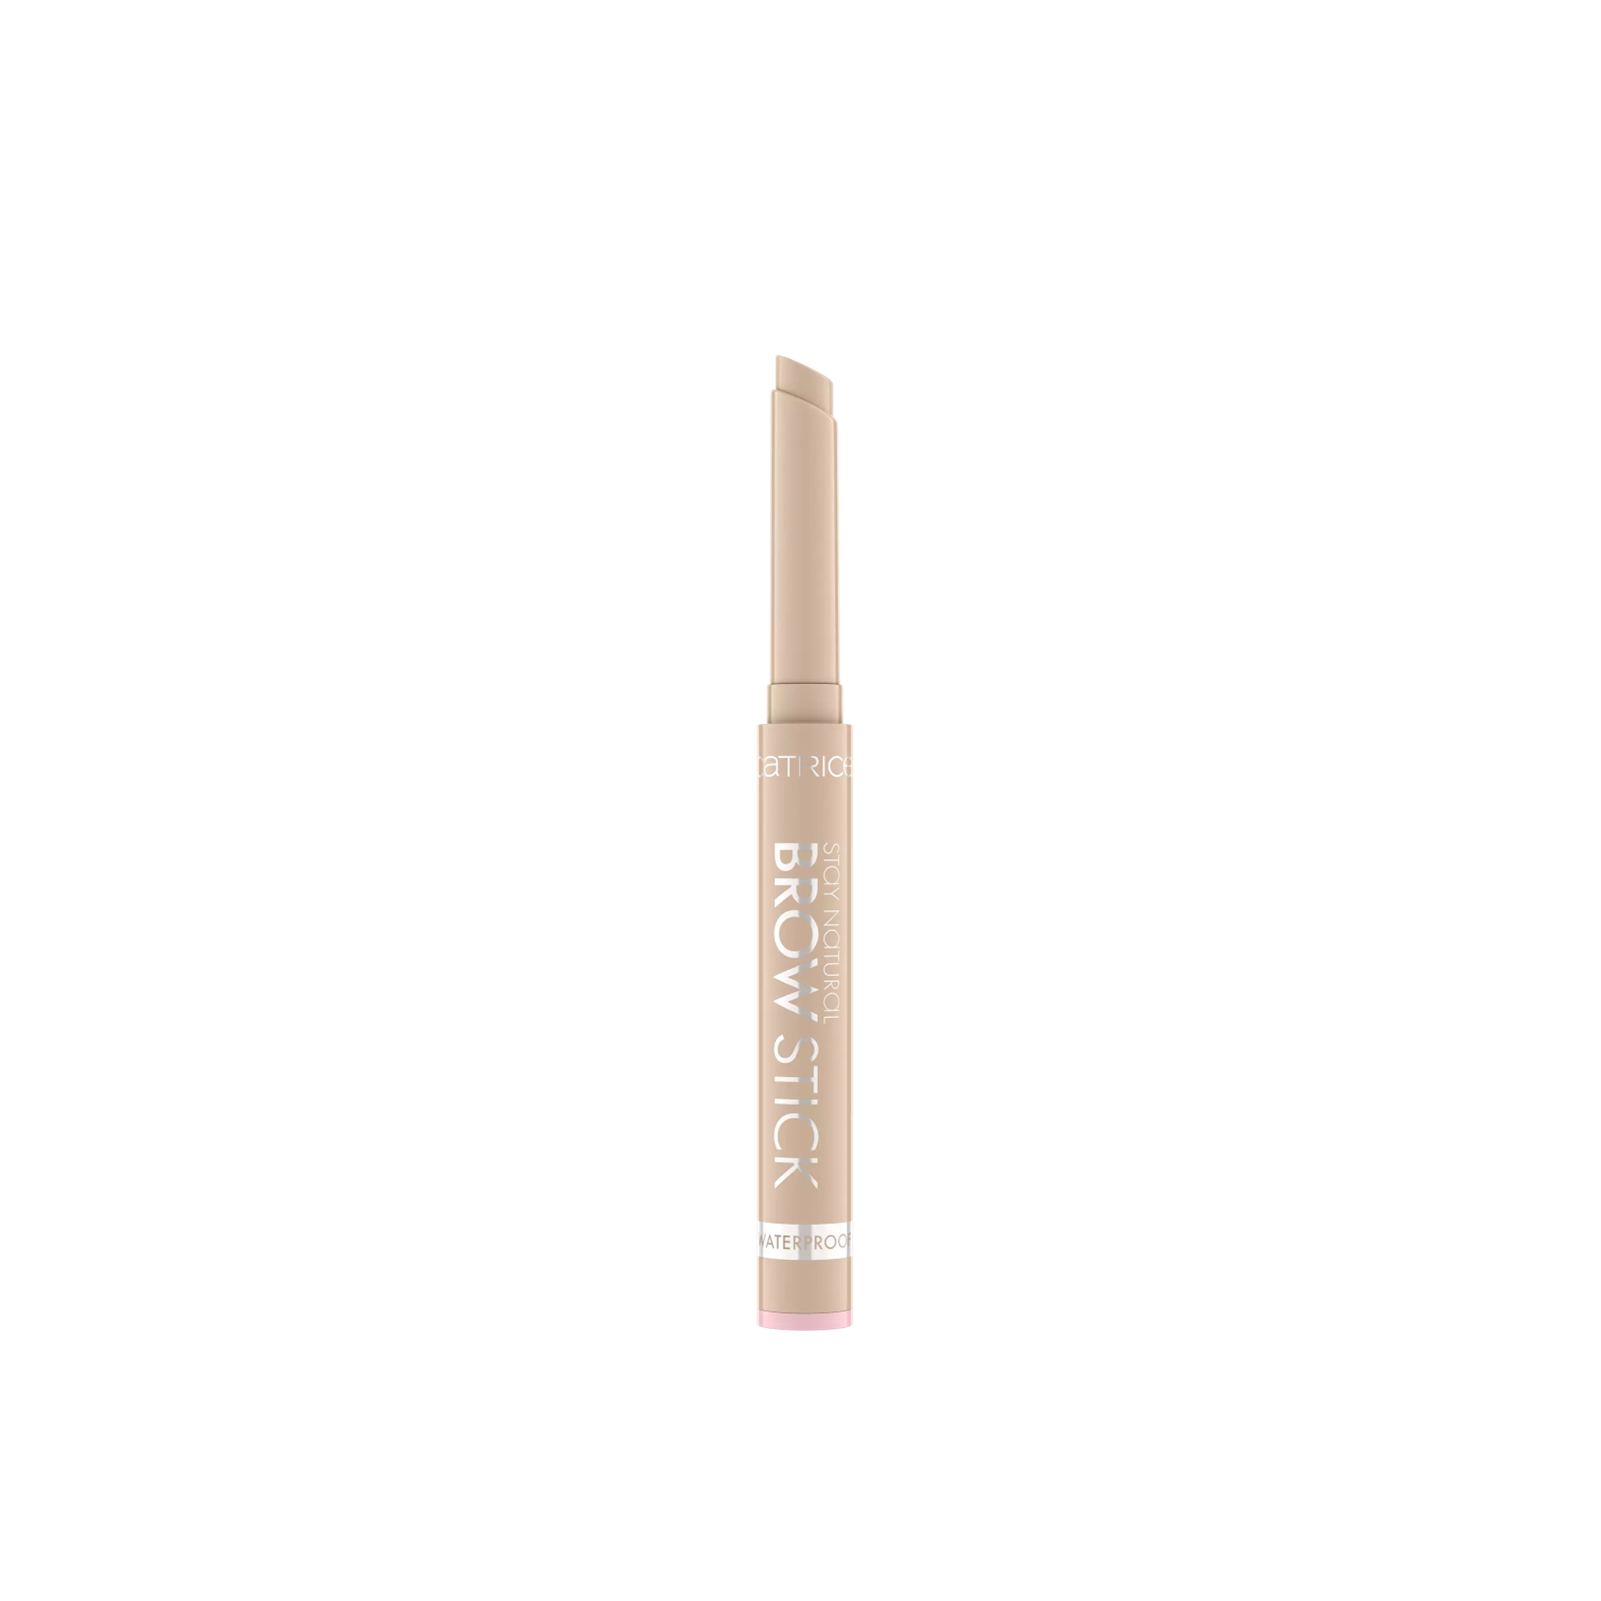 Buy Catrice Stay Natural Waterproof Soft · Brow USA 1g 010 Blonde oz) (0.03 Stick